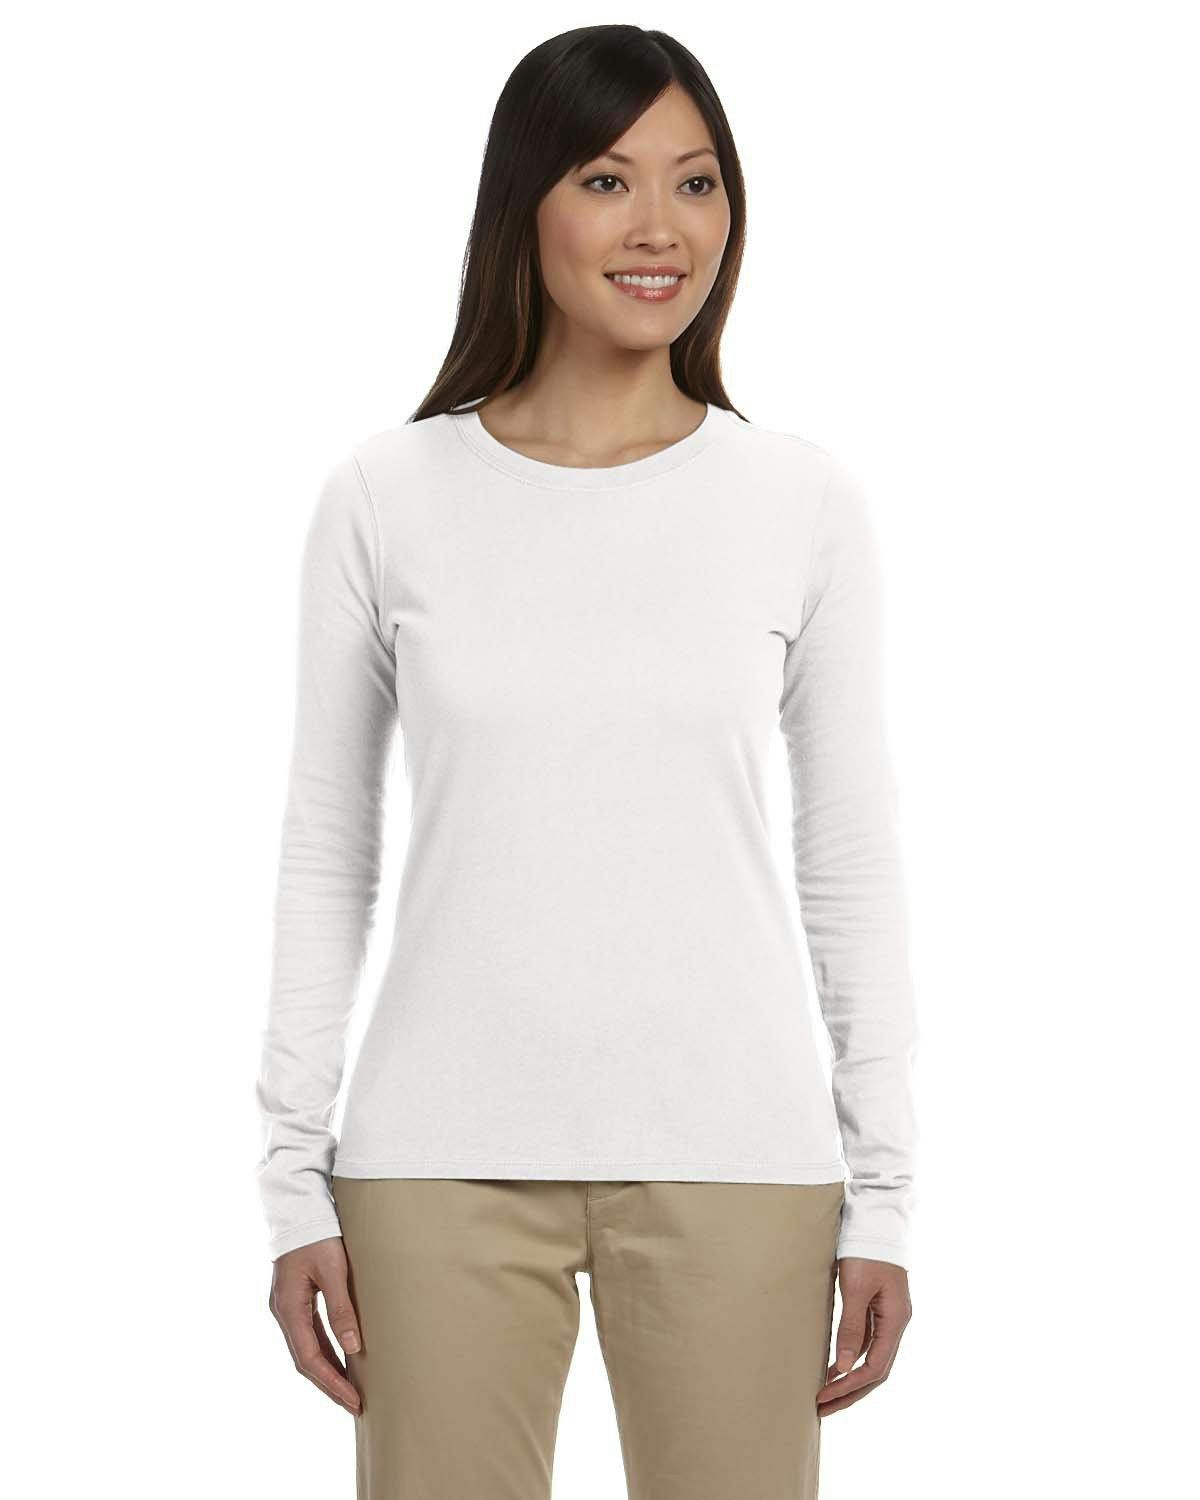 Image for Ladies' Classic Long-Sleeve T-Shirt